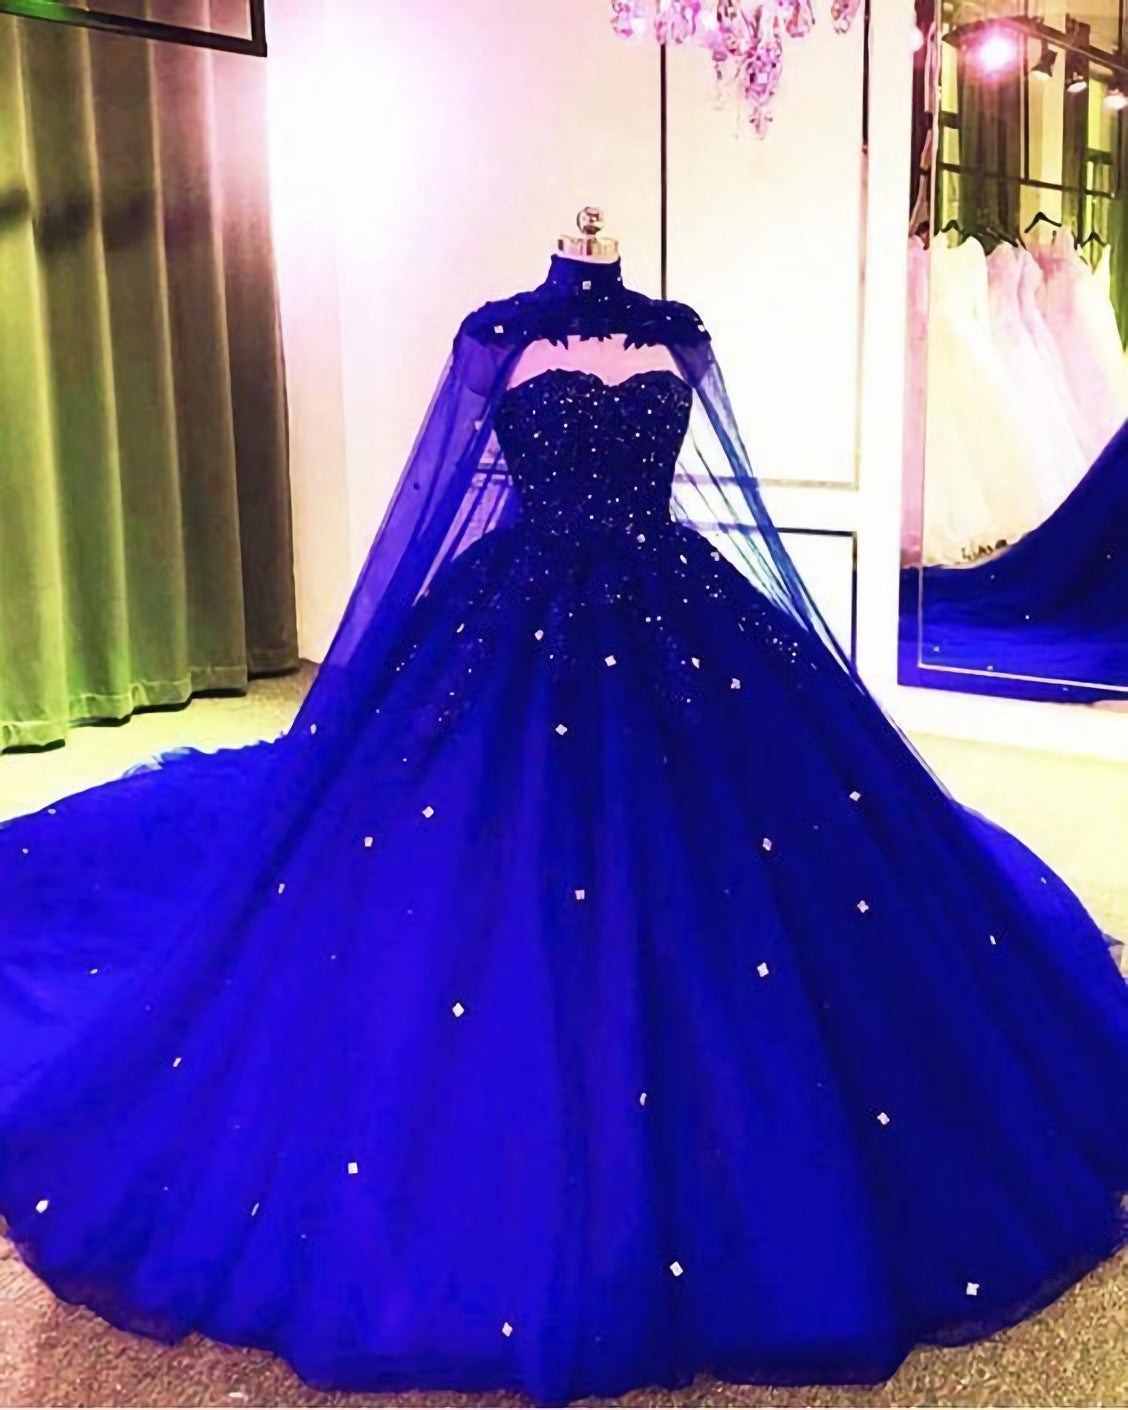 Royal Blue Tulle Corset Ball Gown Corset Prom Dress, With Cape Gowns, Evening Dresses Long Sleeve